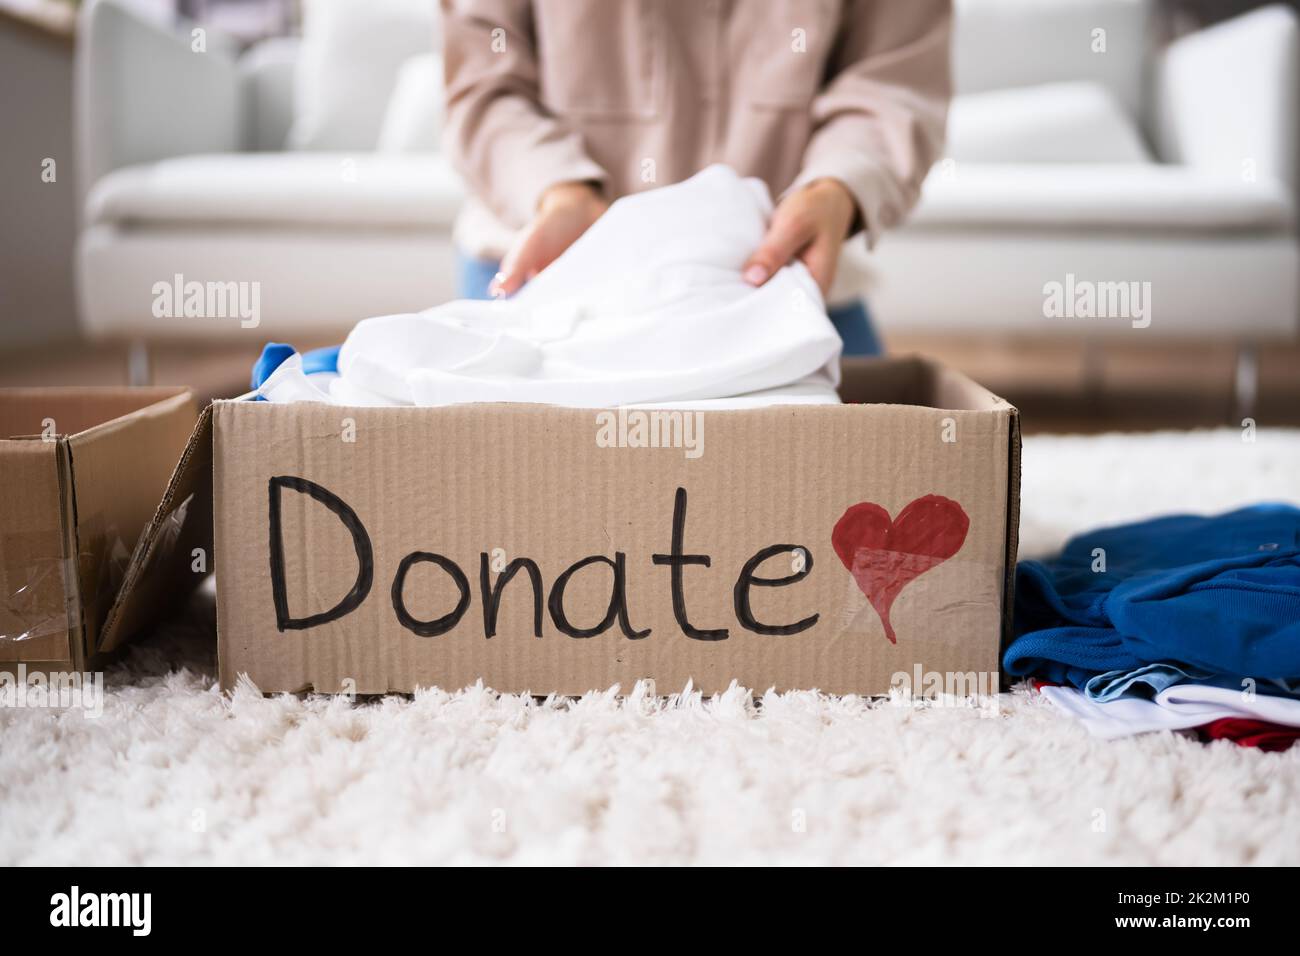 Donating Decluttering And Cleaning Up Wardrobe Stock Photo